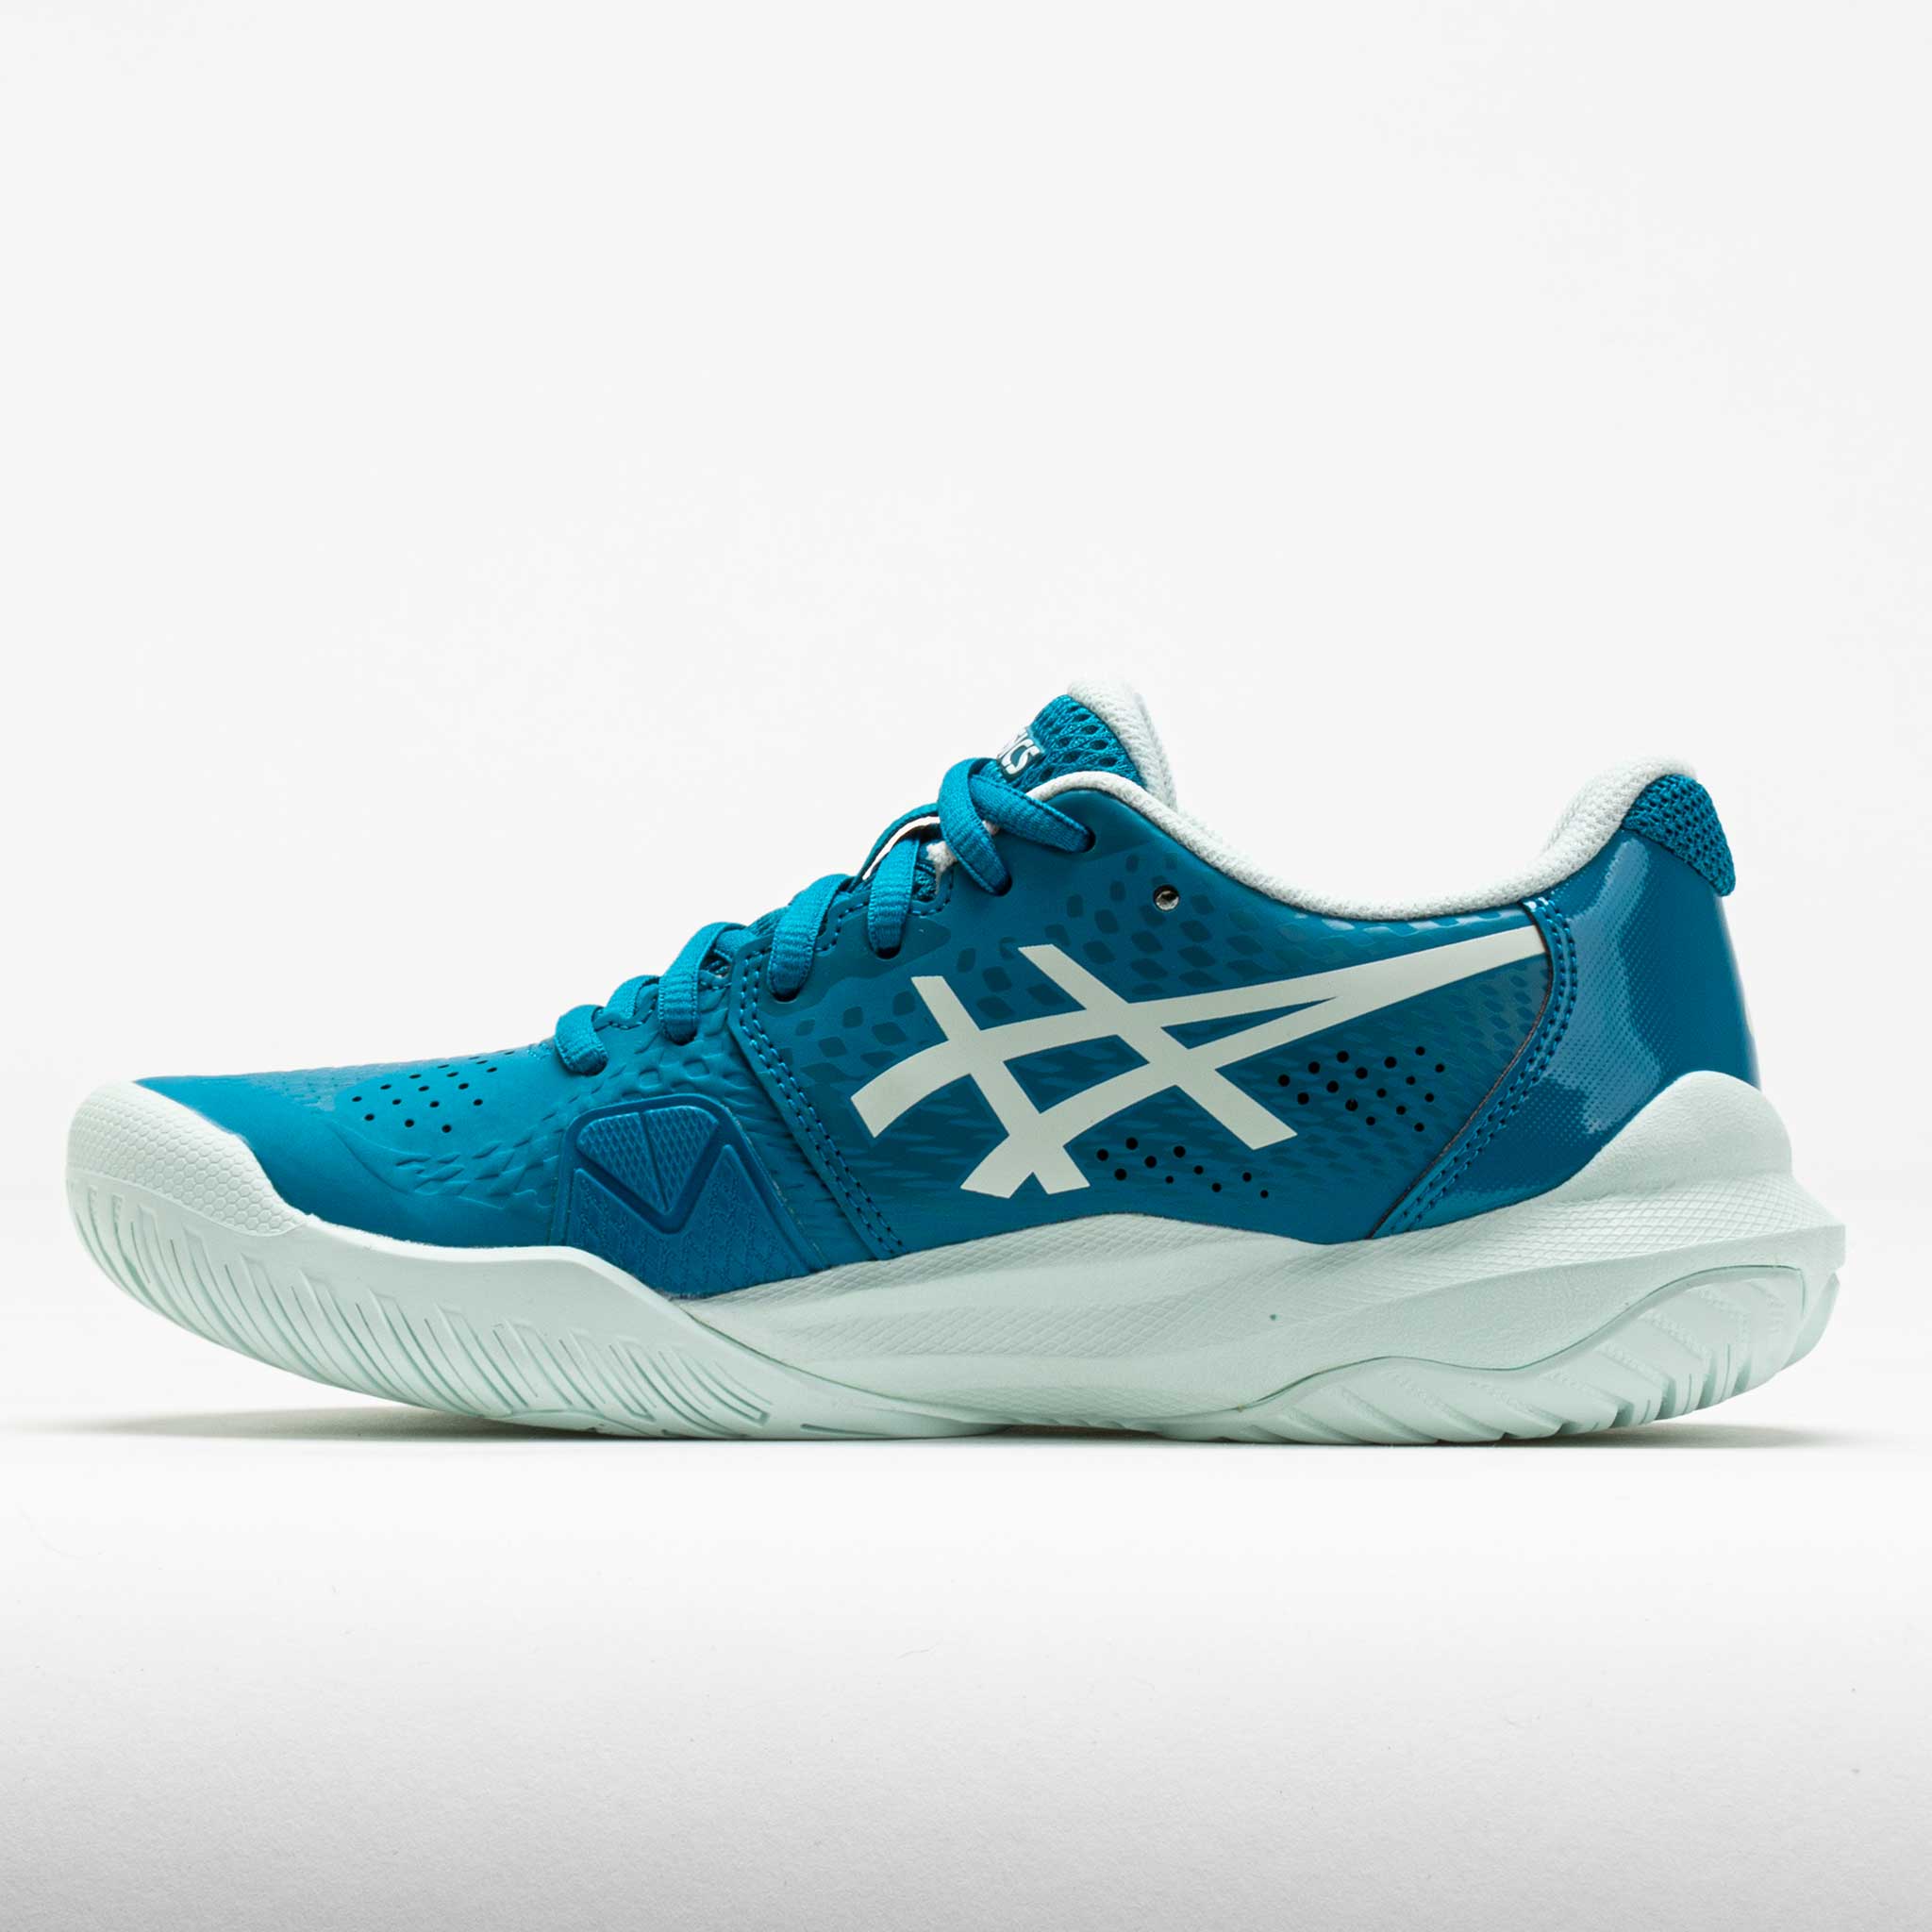 ASICS GEL-Challenger 14 Women's Teal Blue/Soothing Sea